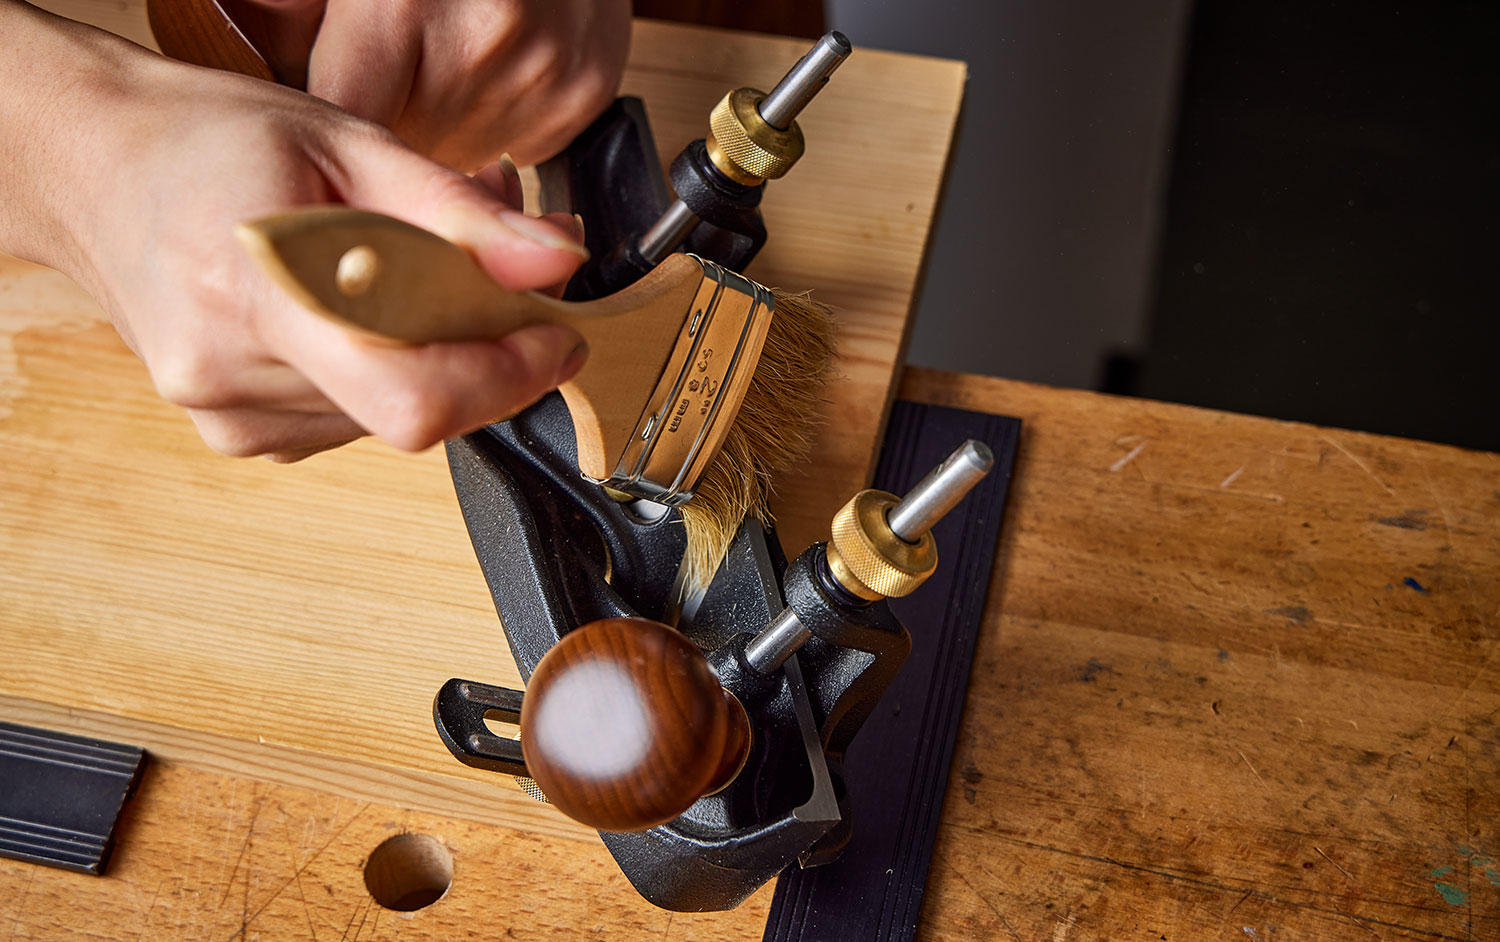 Using a paint brush to apply a coating of tool wax to a Veritas skew rabbet plane.